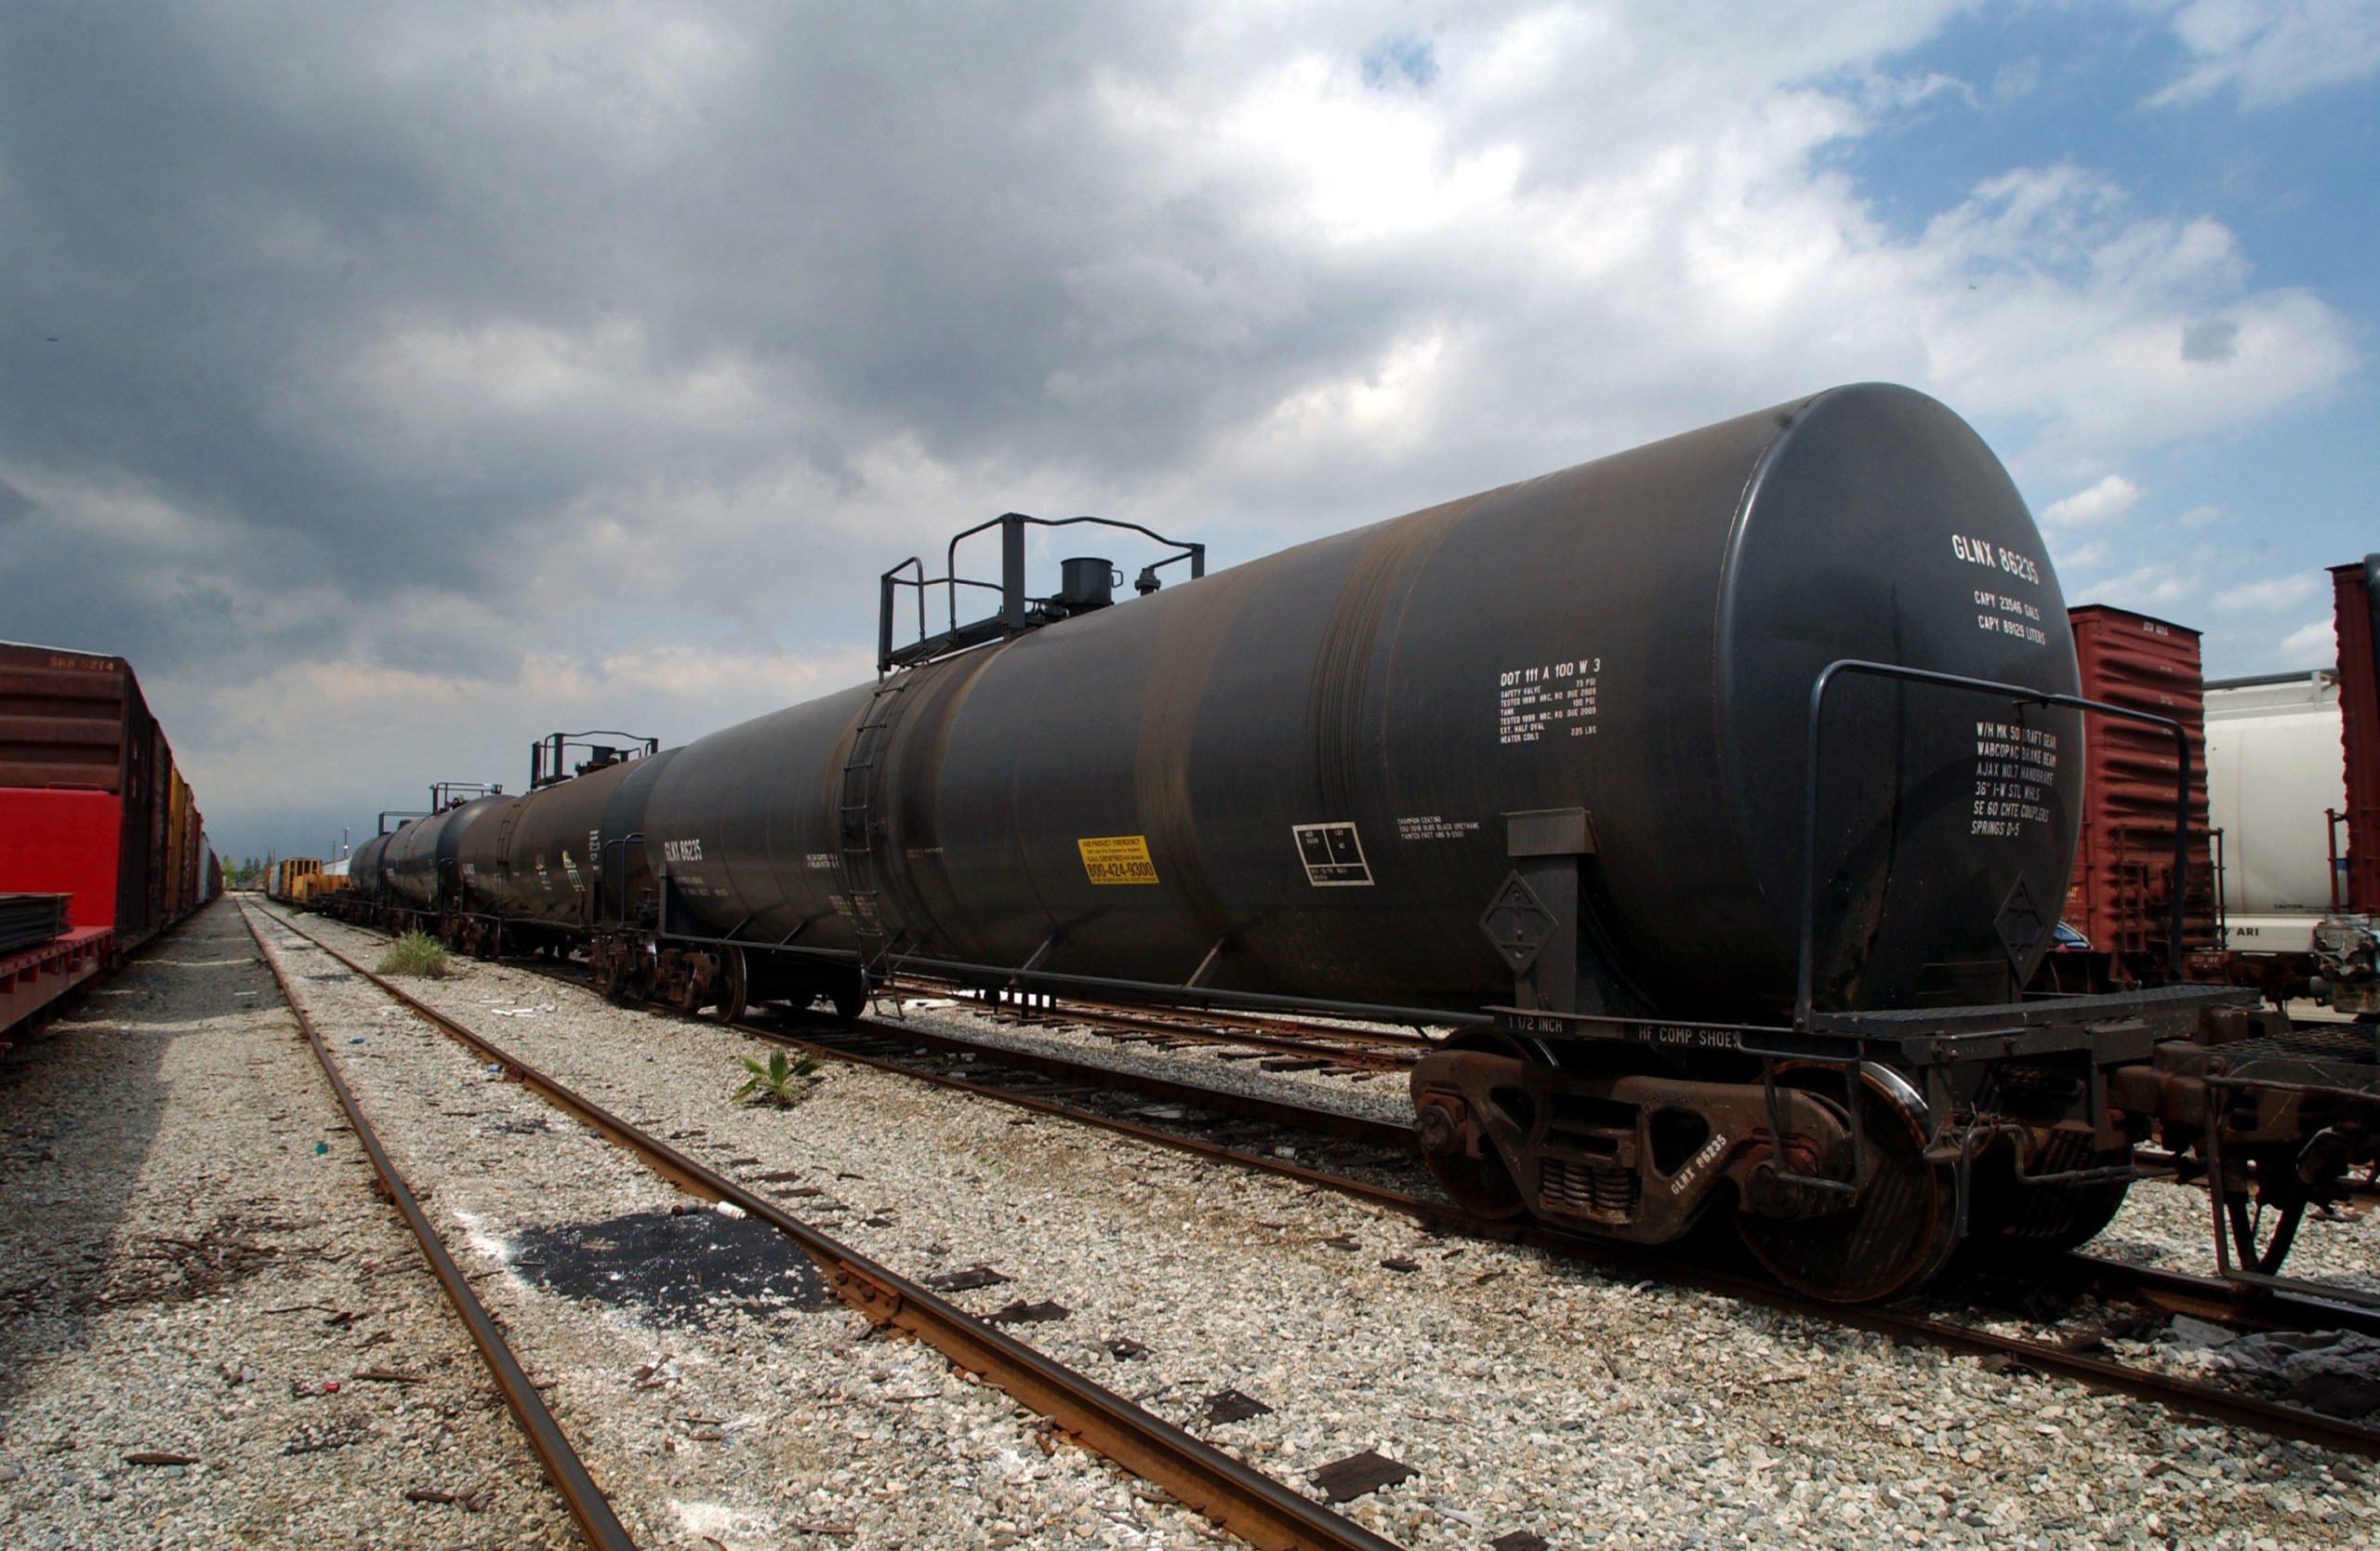 A tank car is pictured in Santa Fe Springs, California. (David McNew/Getty Images)